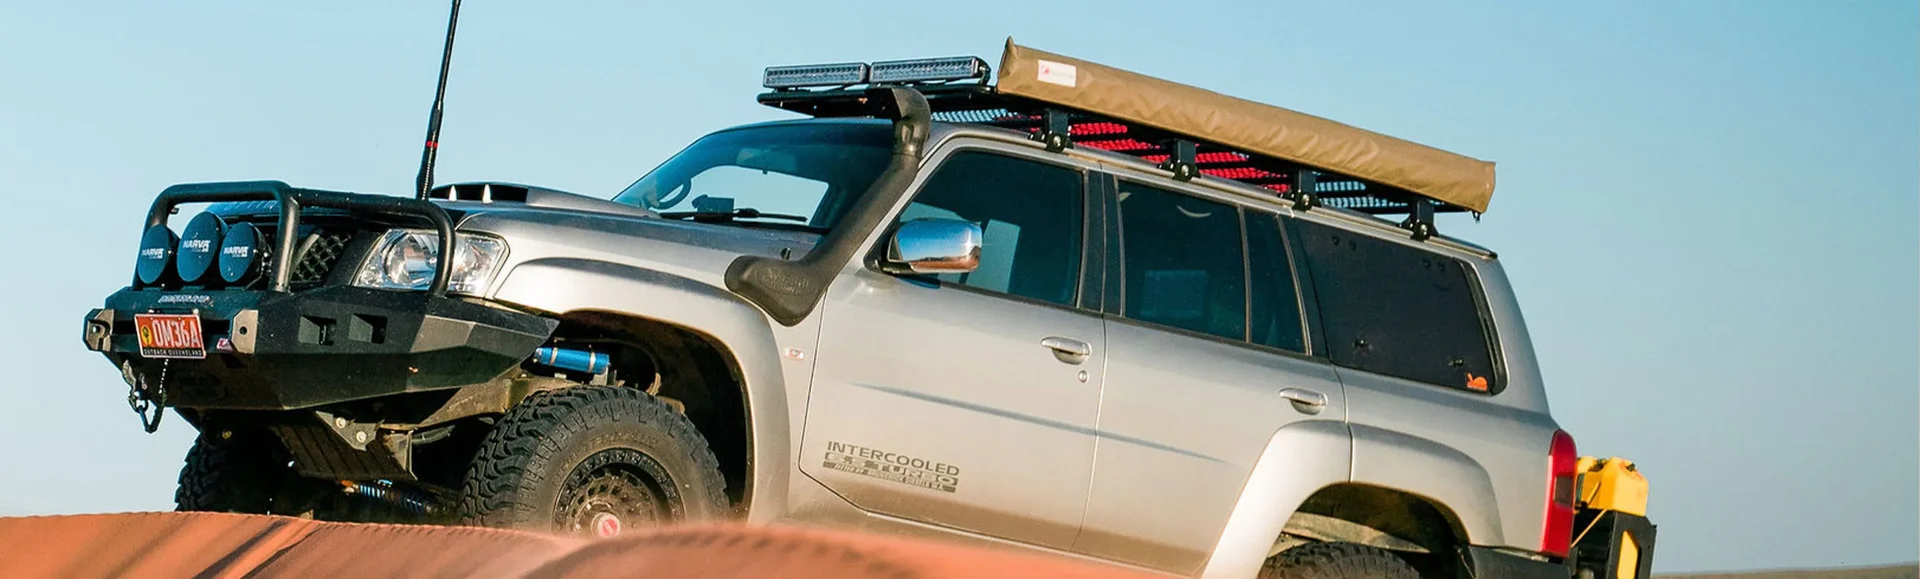 4x4 Accessories to Explore the Warmth of Desert